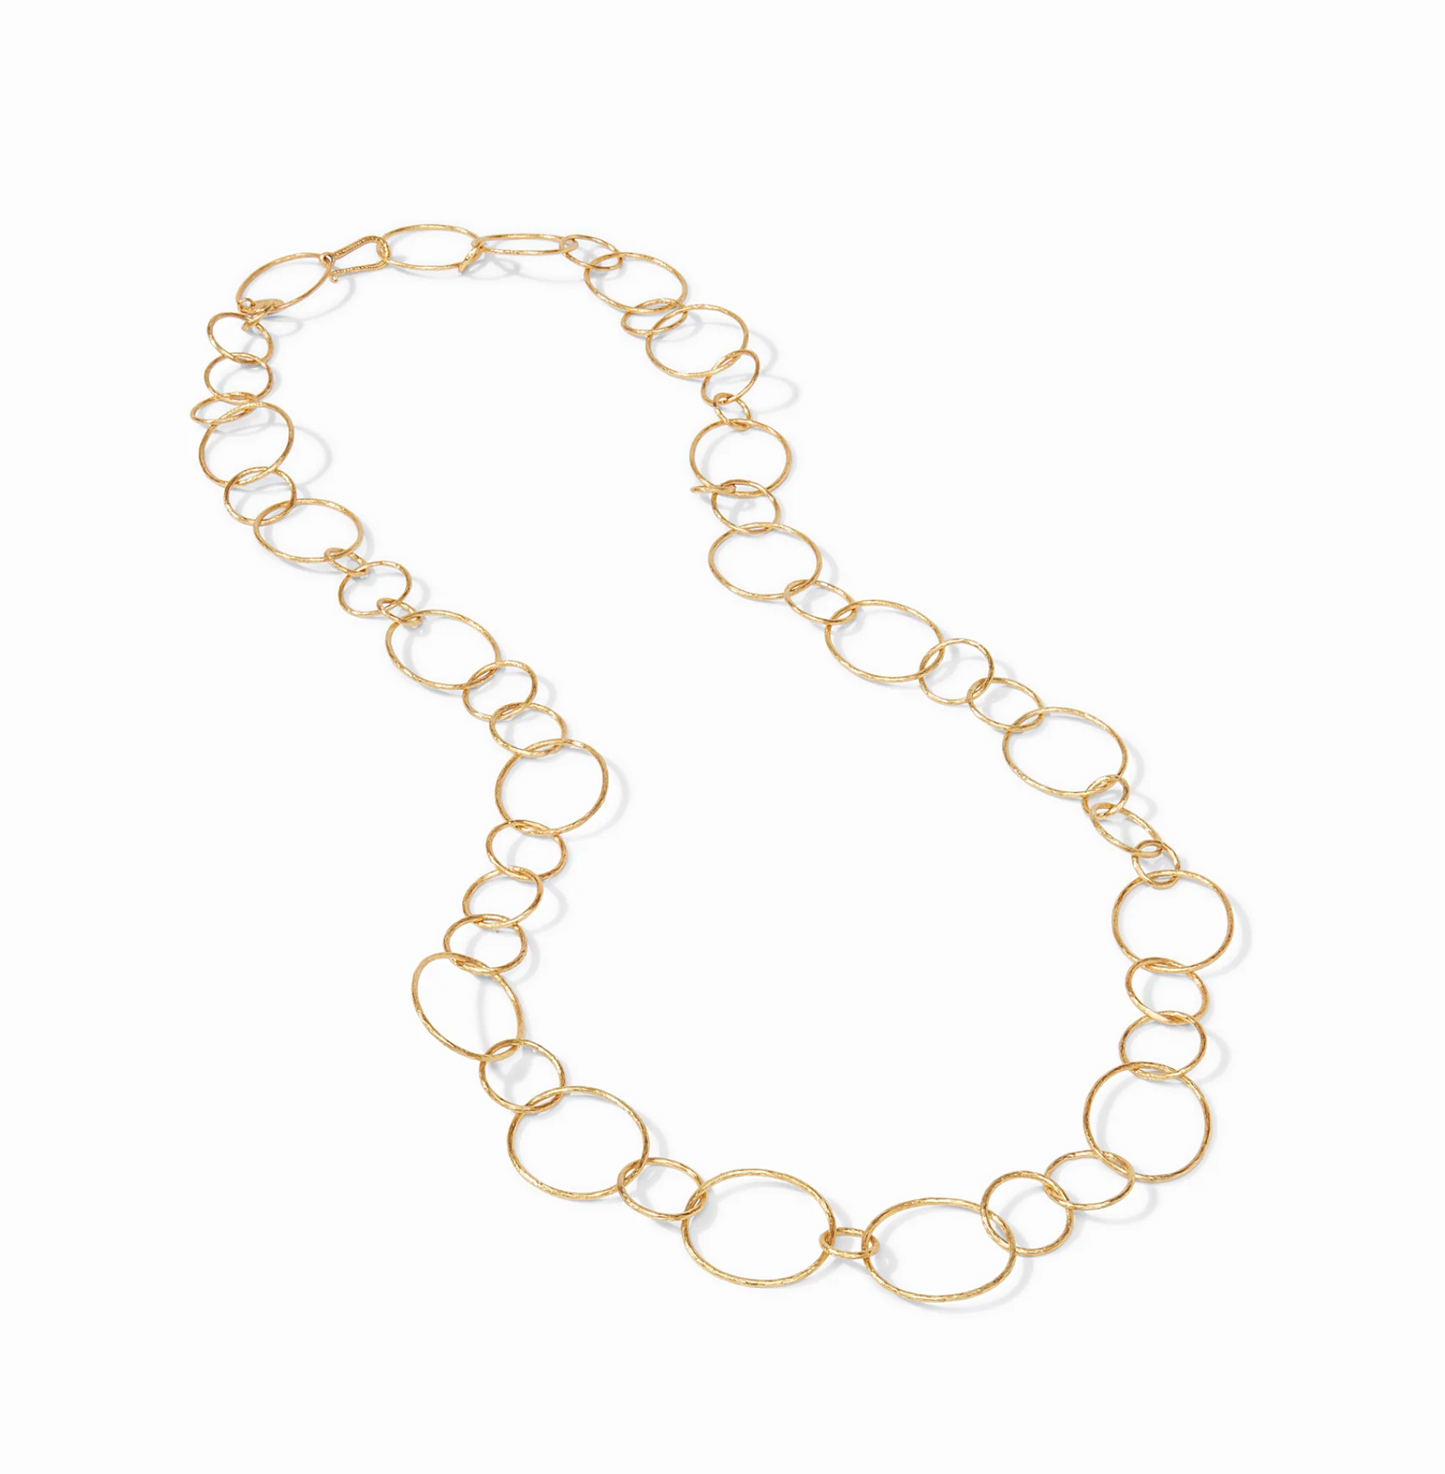 Colette Textured Necklace - Gold - OS